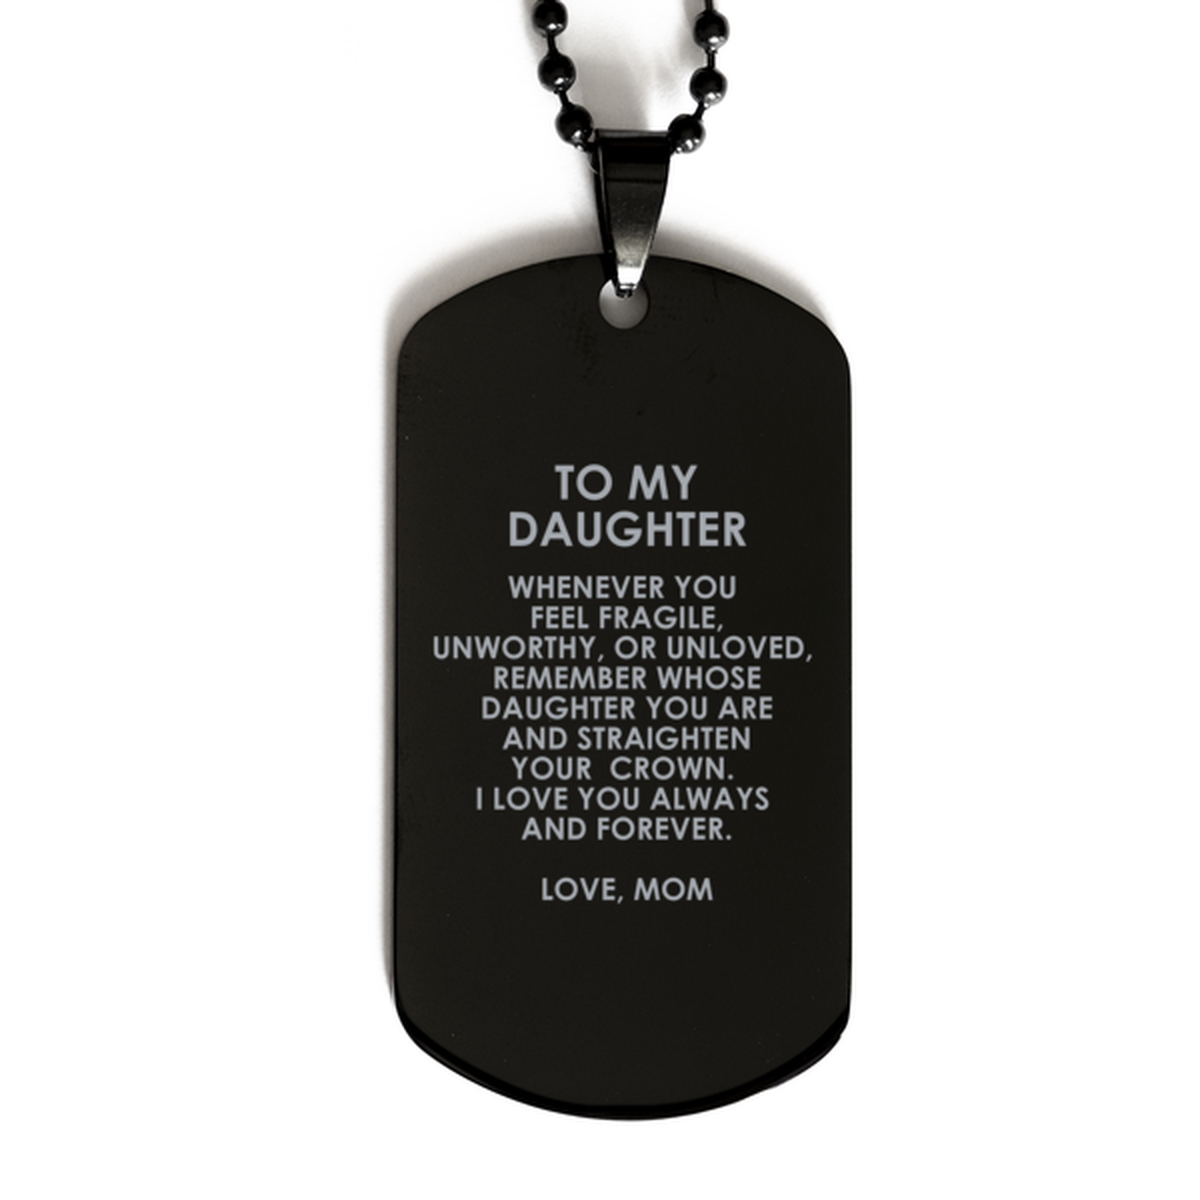 To My Daughter Black Dog Tag, I Love You Always And Forever, Birthday Gifts For Daughter From Mom, Christmas Gifts For Women